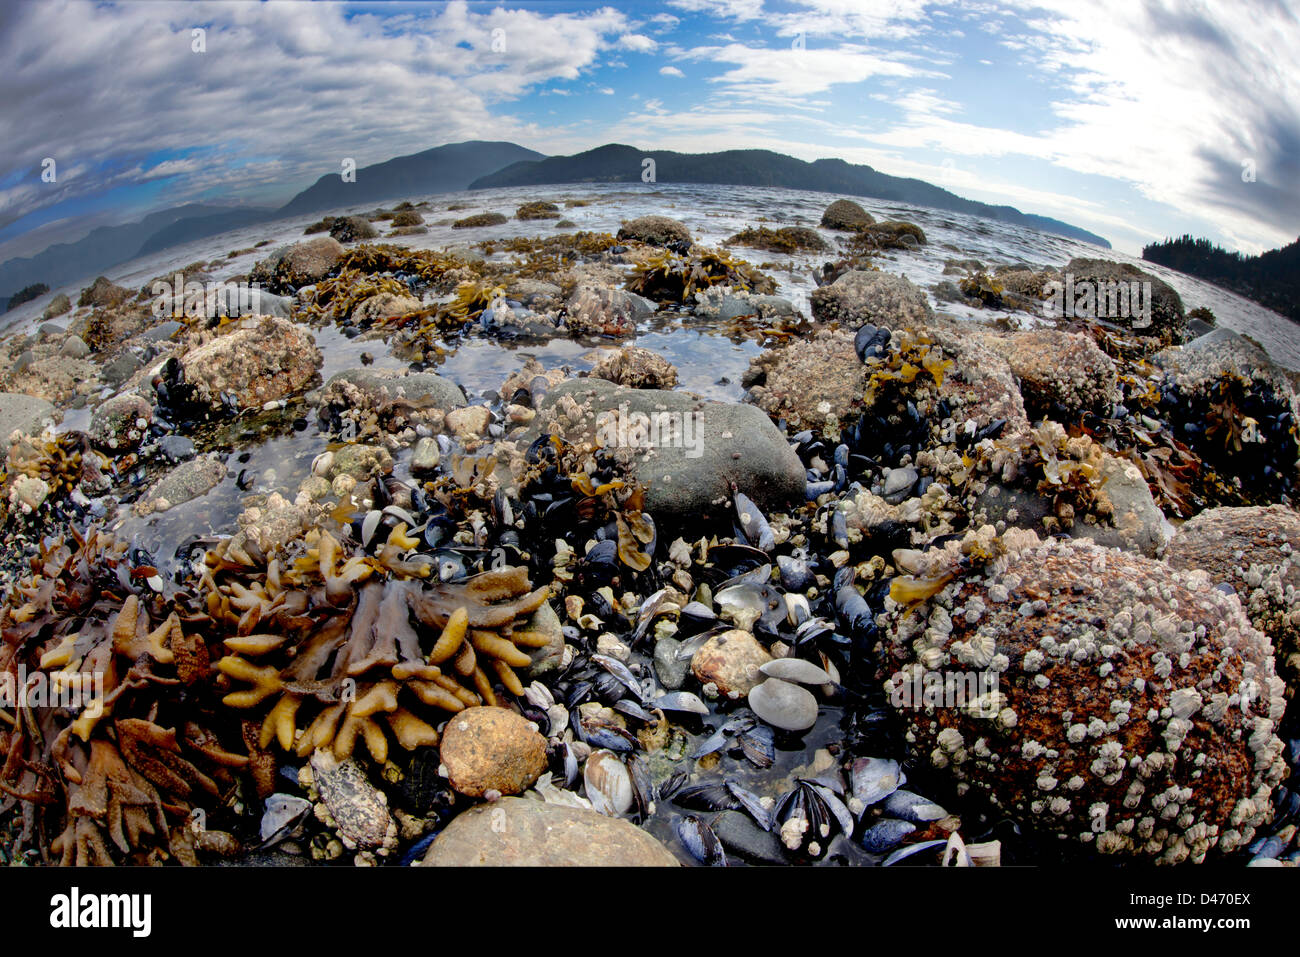 Kelp, mussels and barnacles are visible at low tide in Howe Sound, British Columbia, Canada. Stock Photo